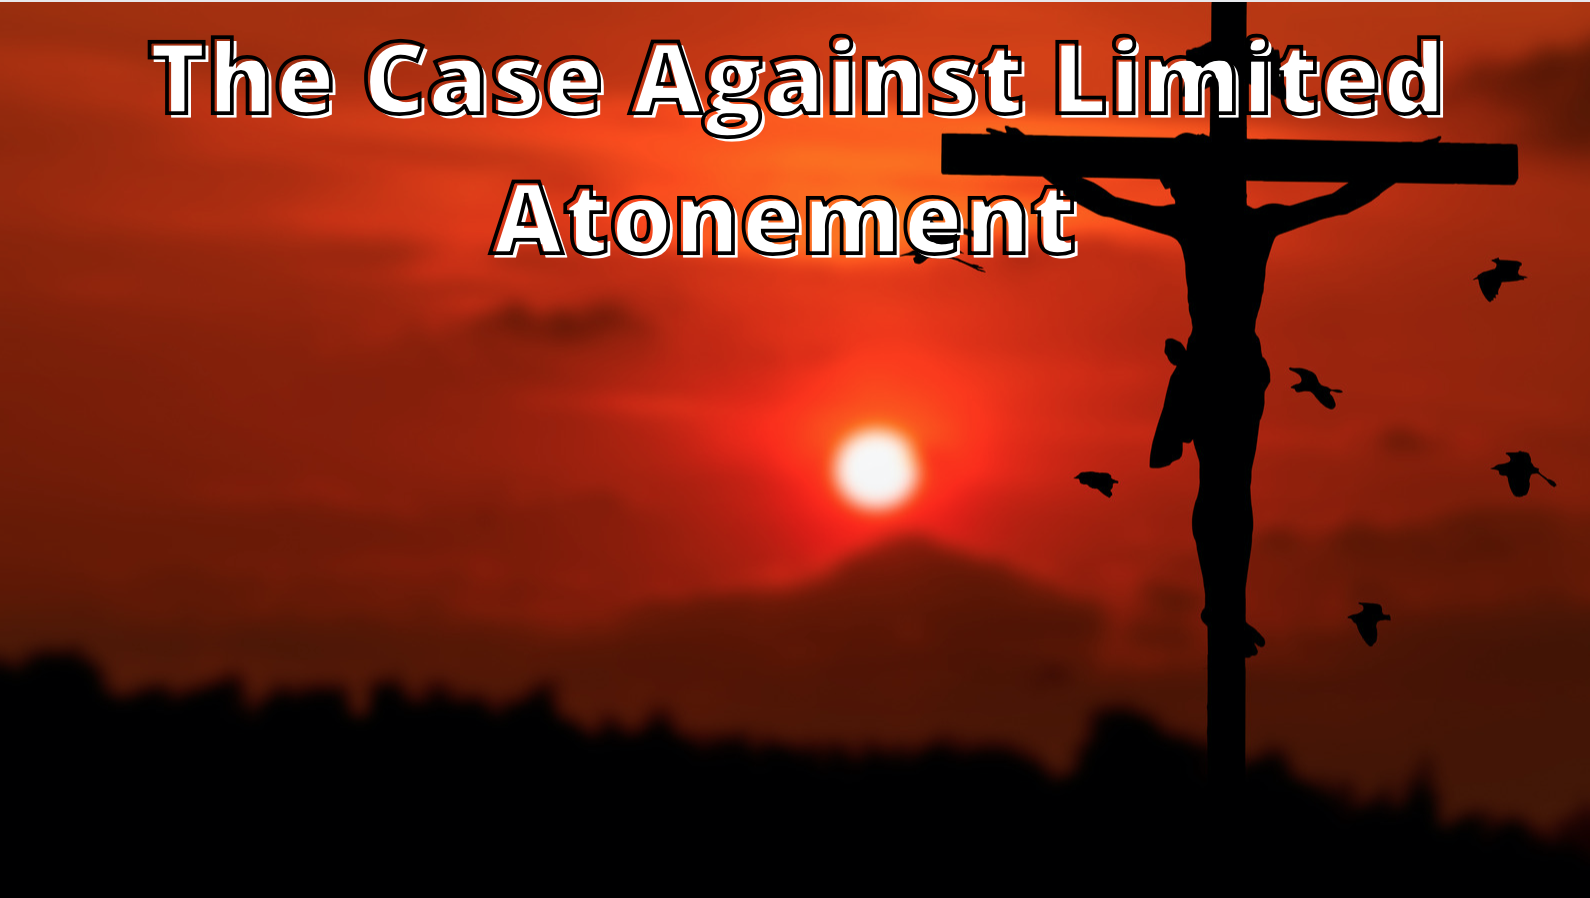 The Case Against Limited Atonement